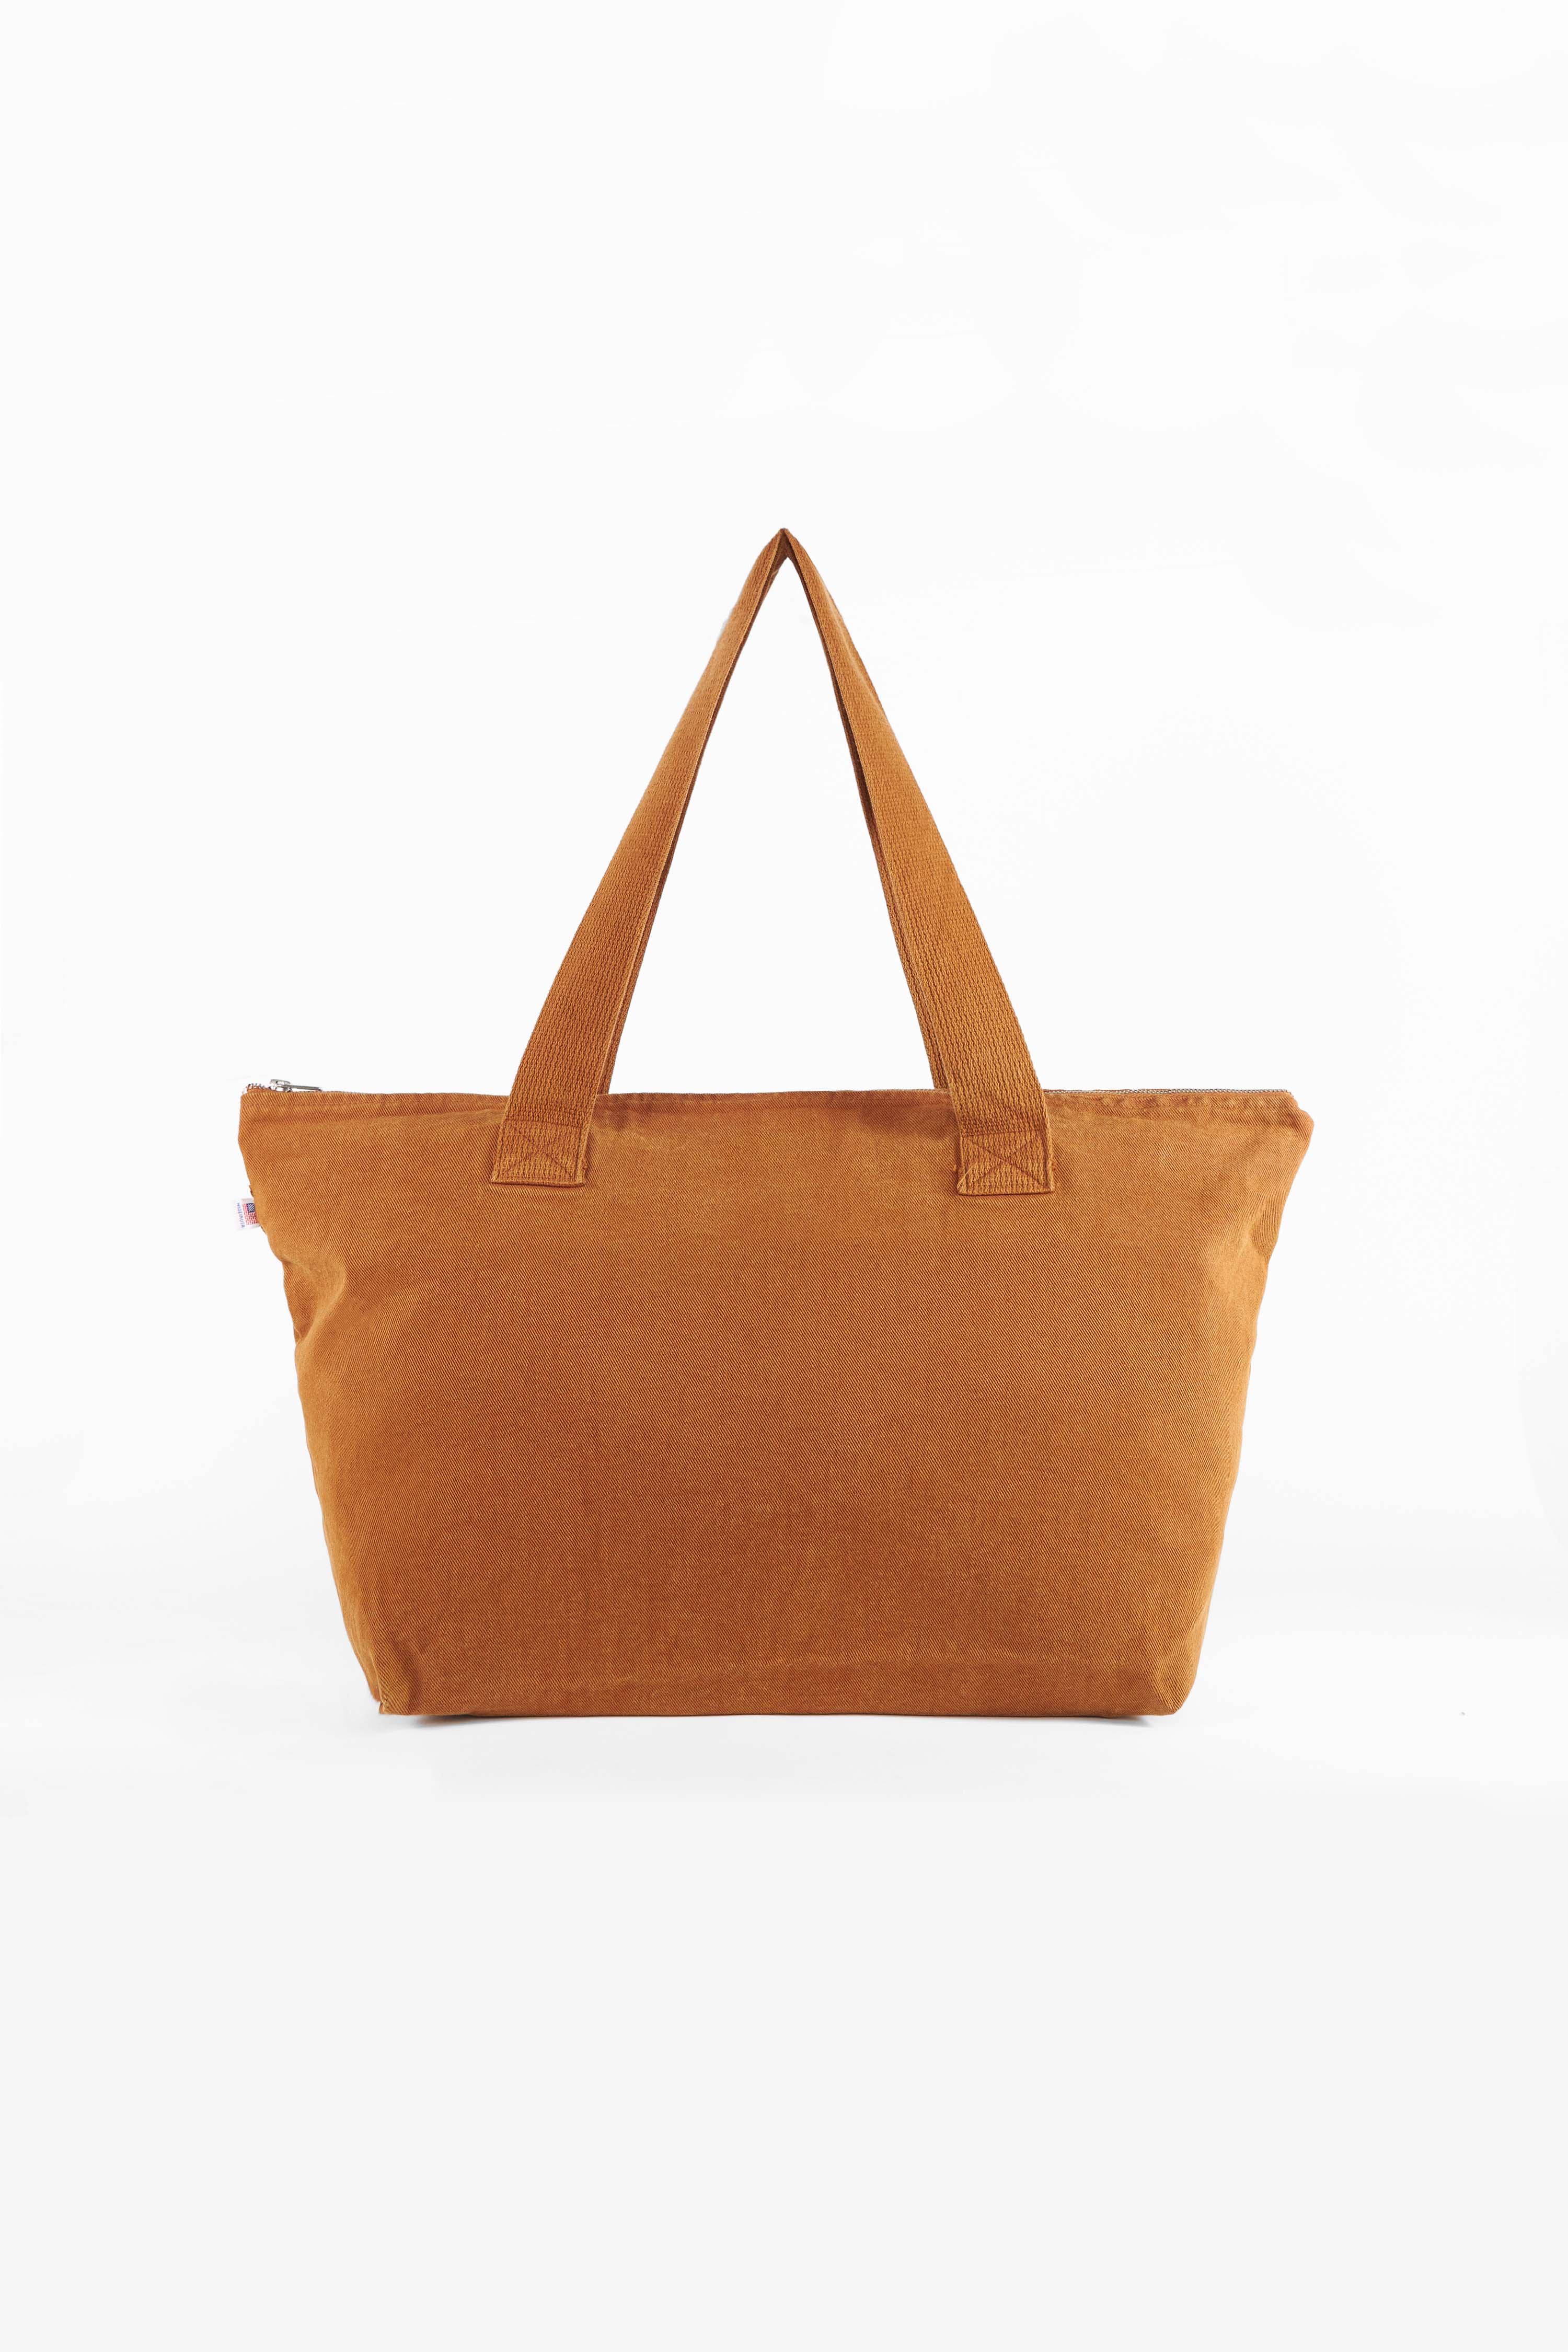 Zipper tote with adjustsble straps. The Chelsea is a nice Neverfull al